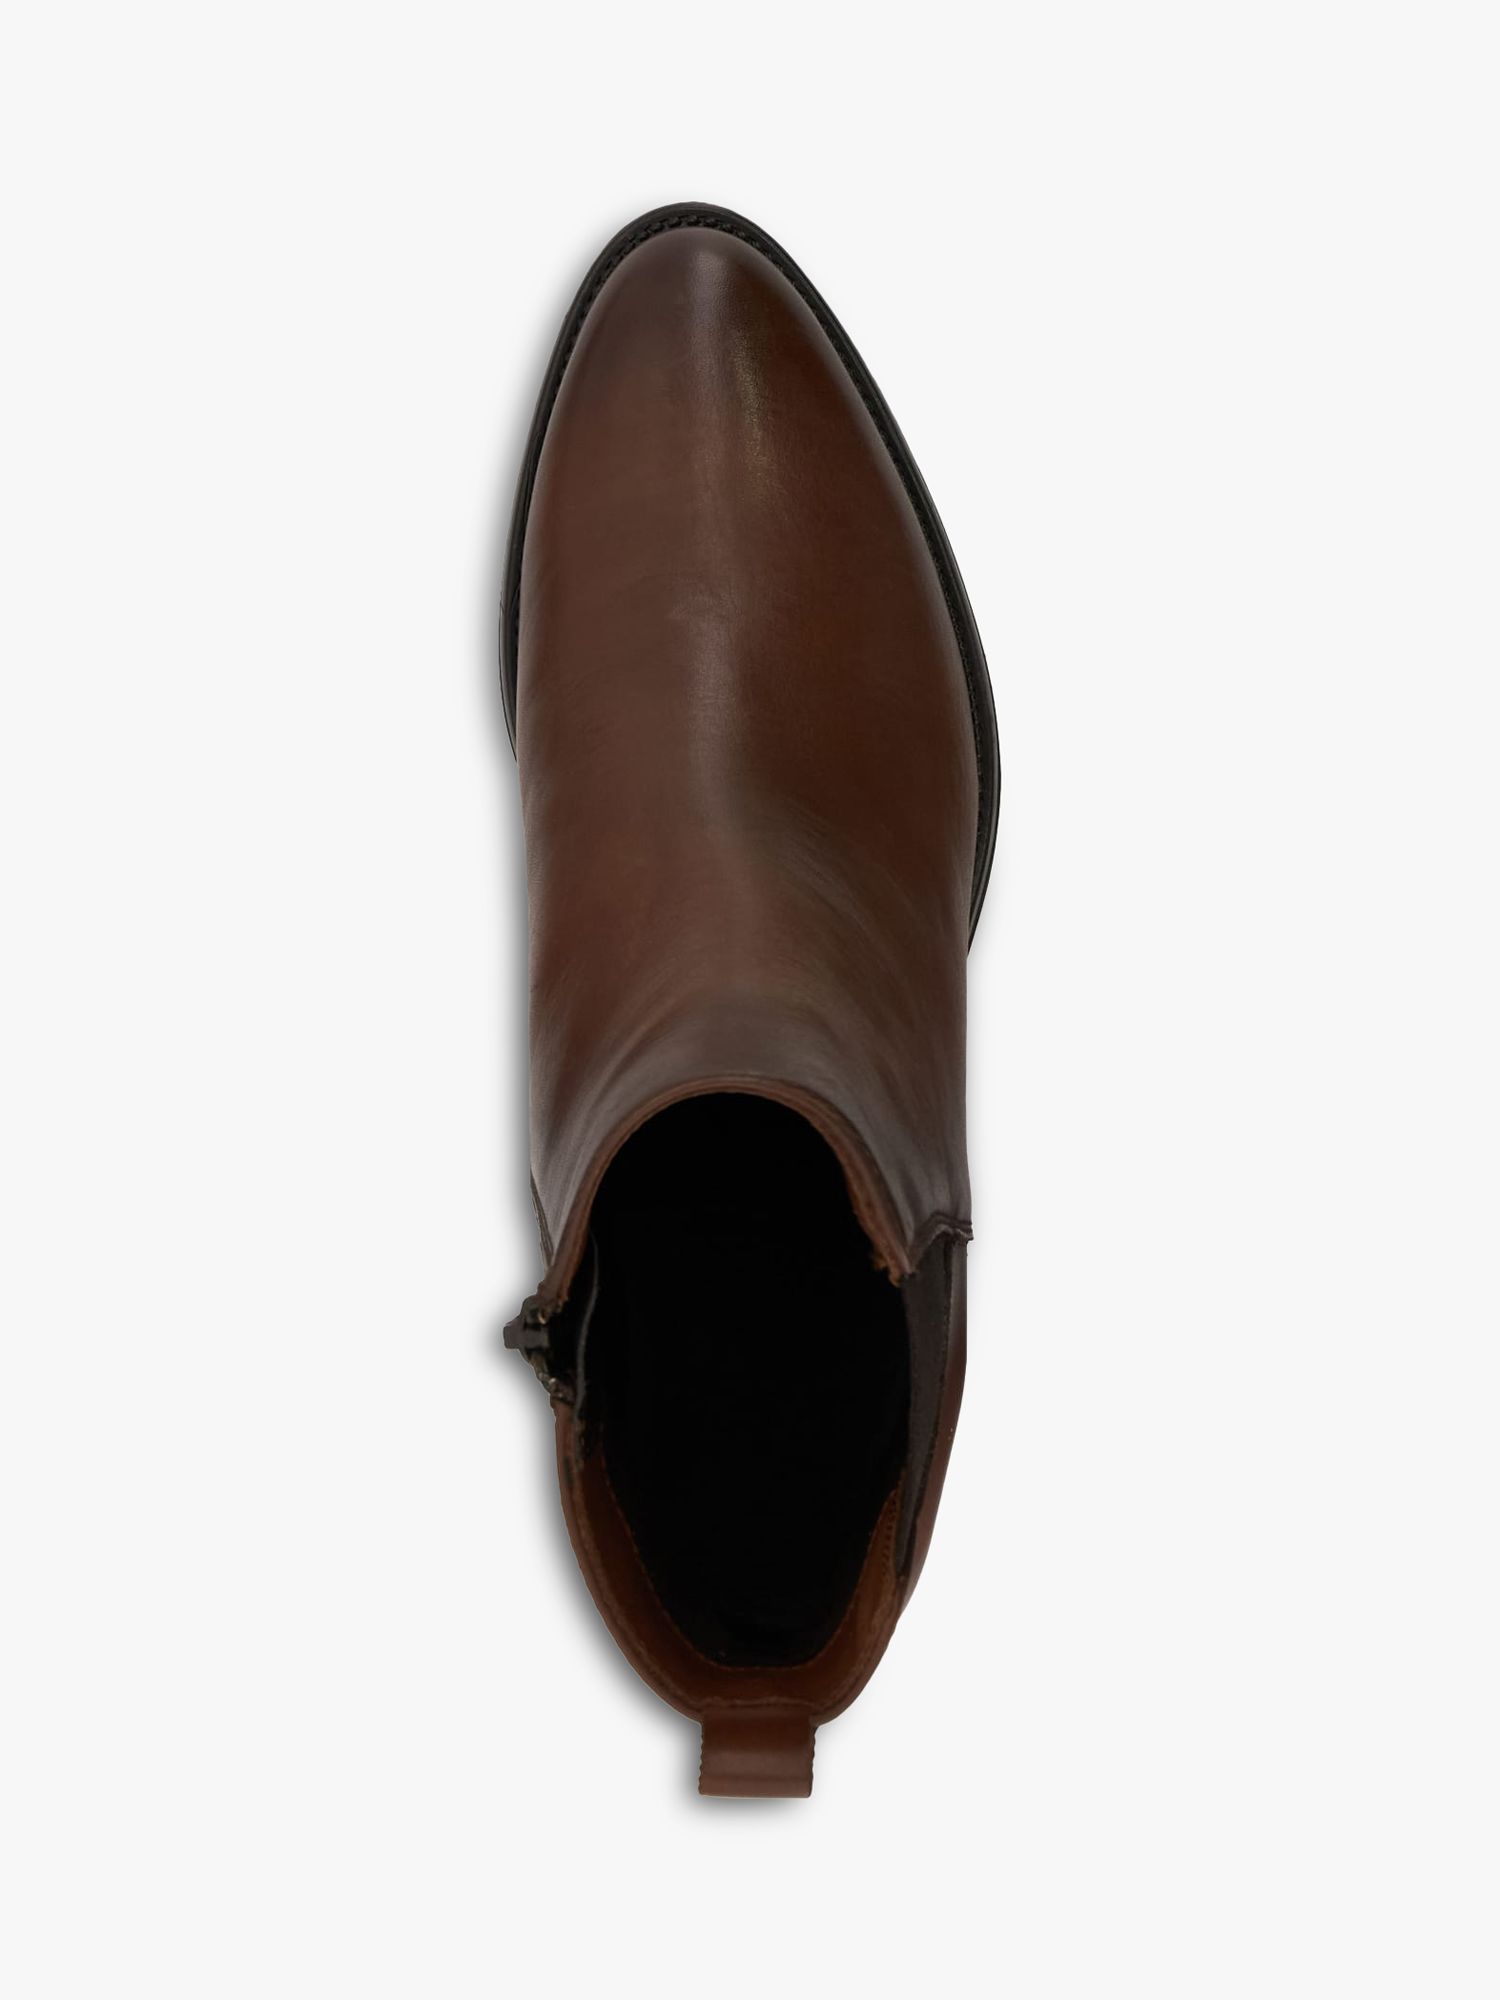 Buy Dune Pouring Suede Chelsea Boots, Brown Online at johnlewis.com